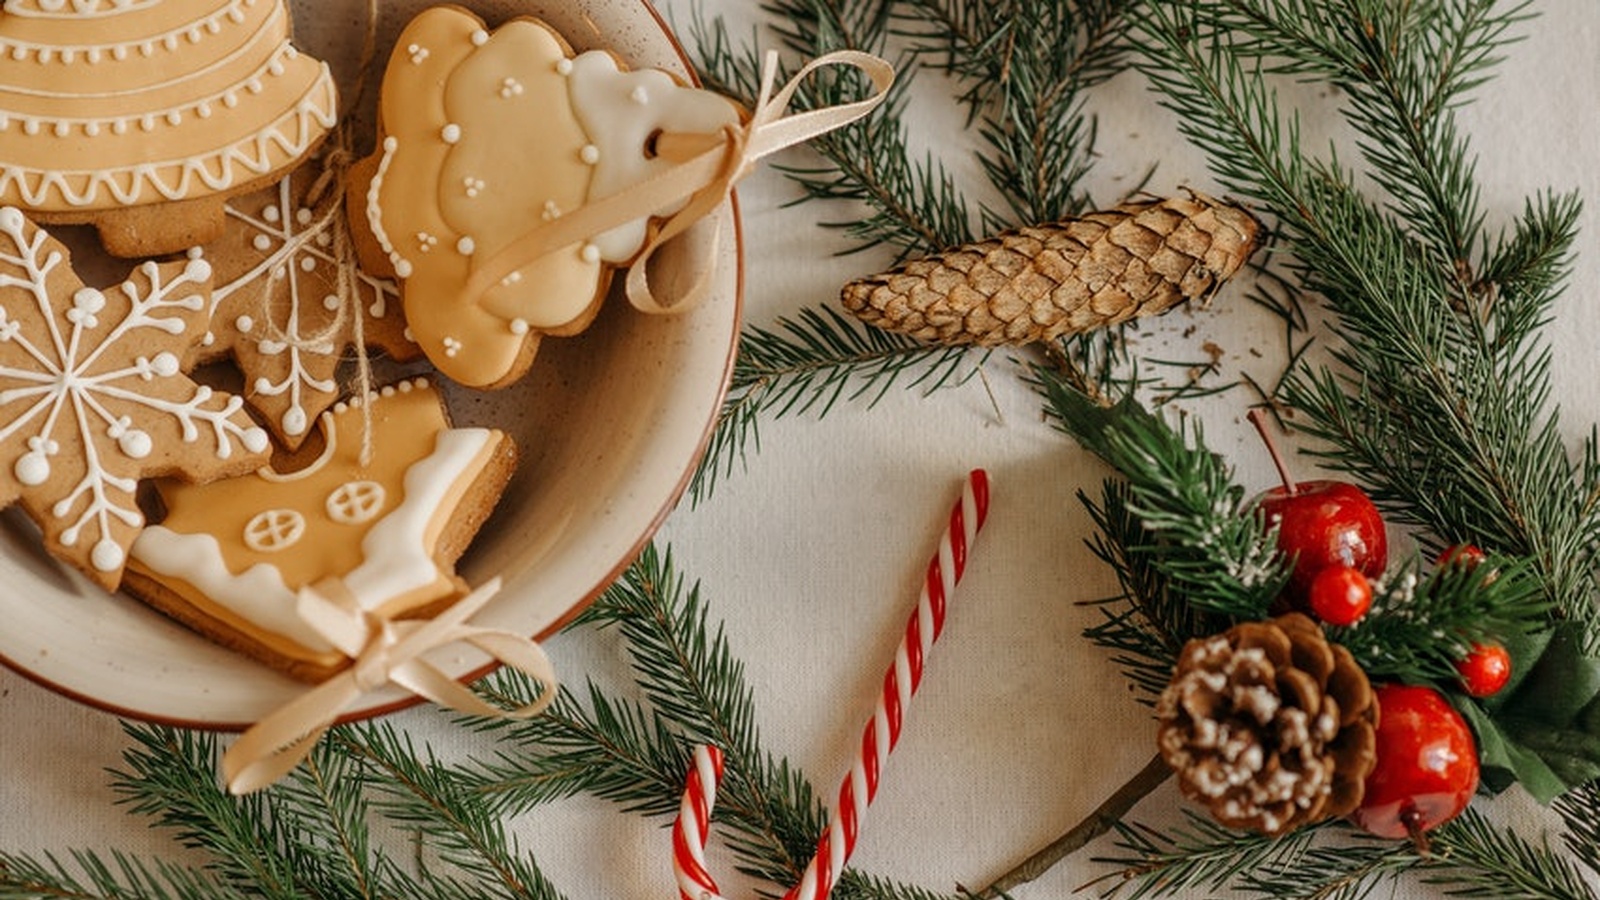 8 Reasons To Celebrate A Plant-Based Christmas This Year